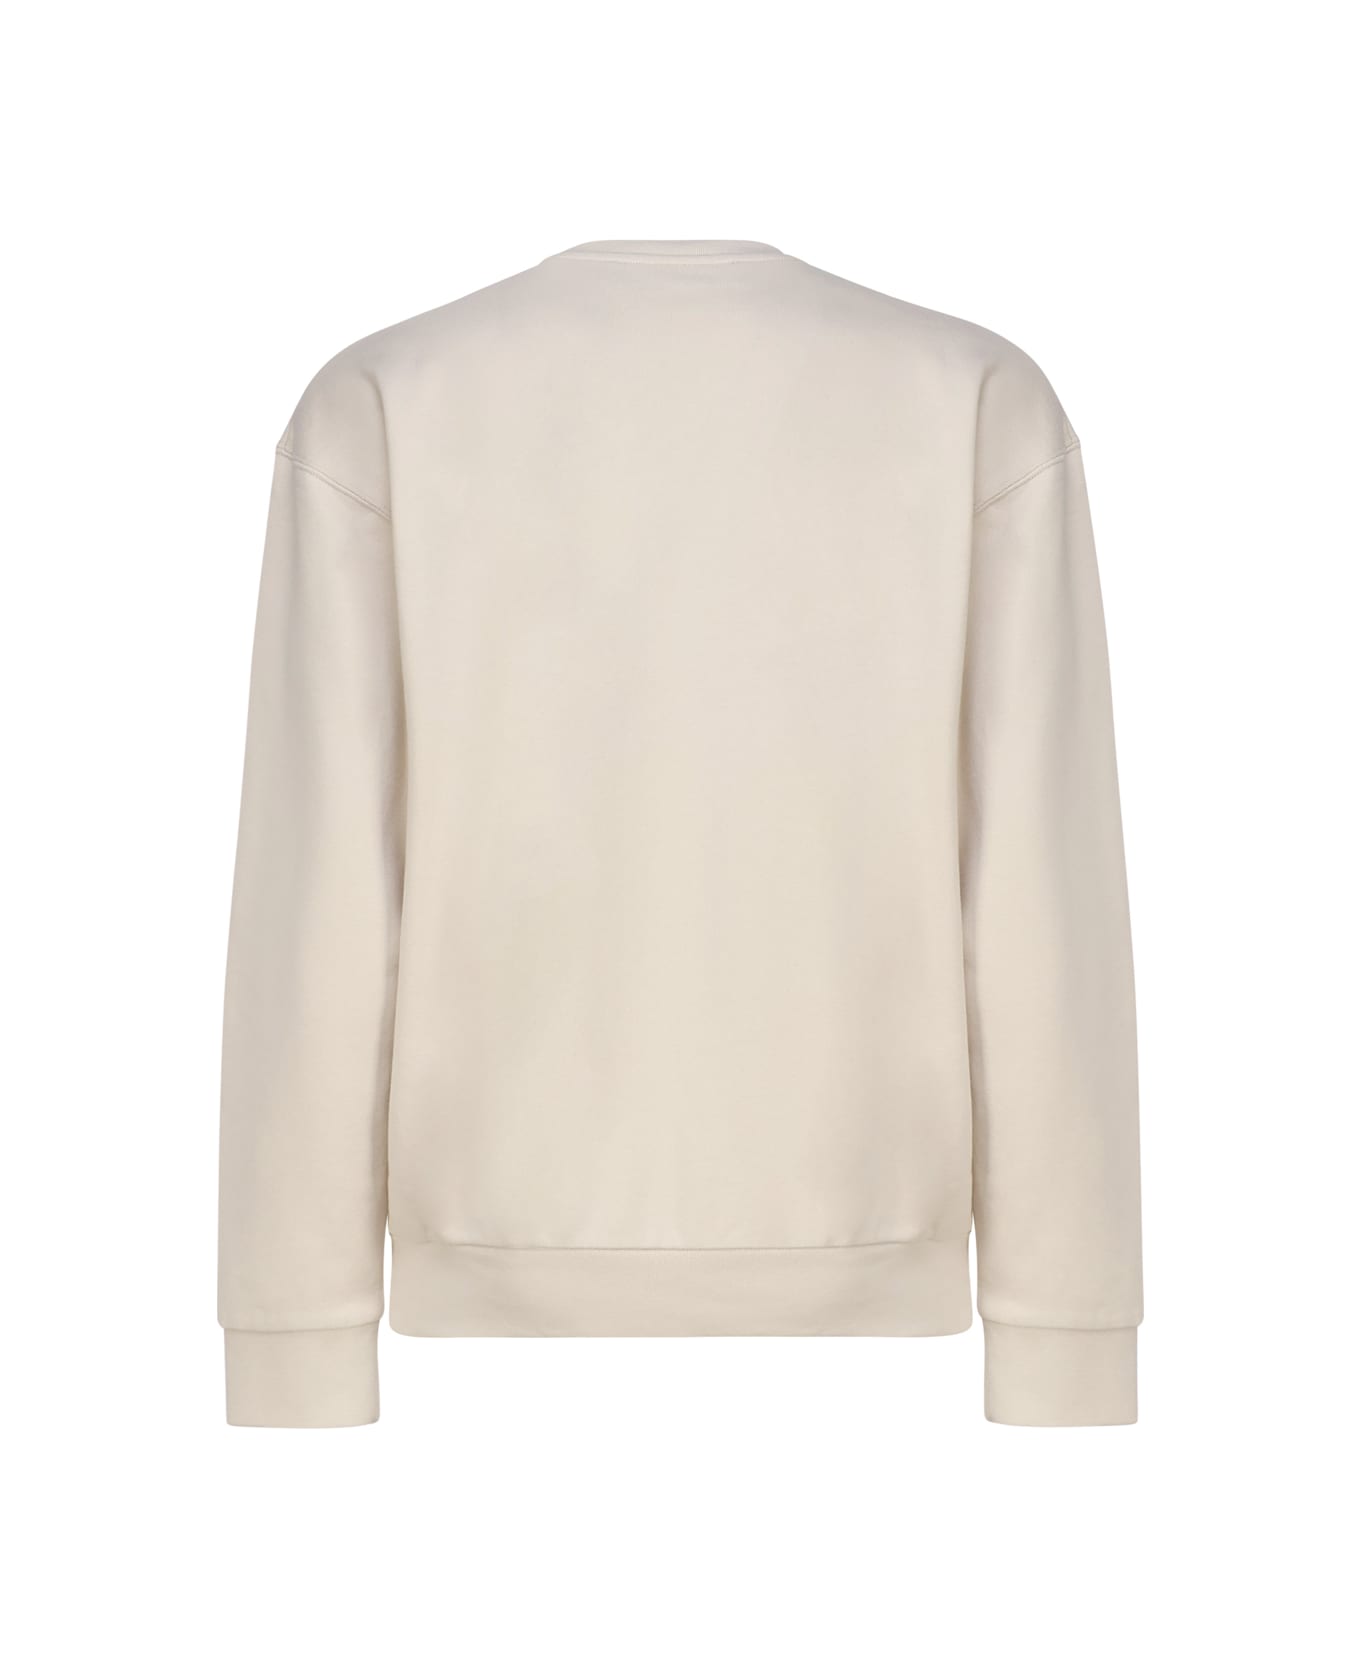 J.W. Anderson Sweatshirt With Embroidery - BEIGE